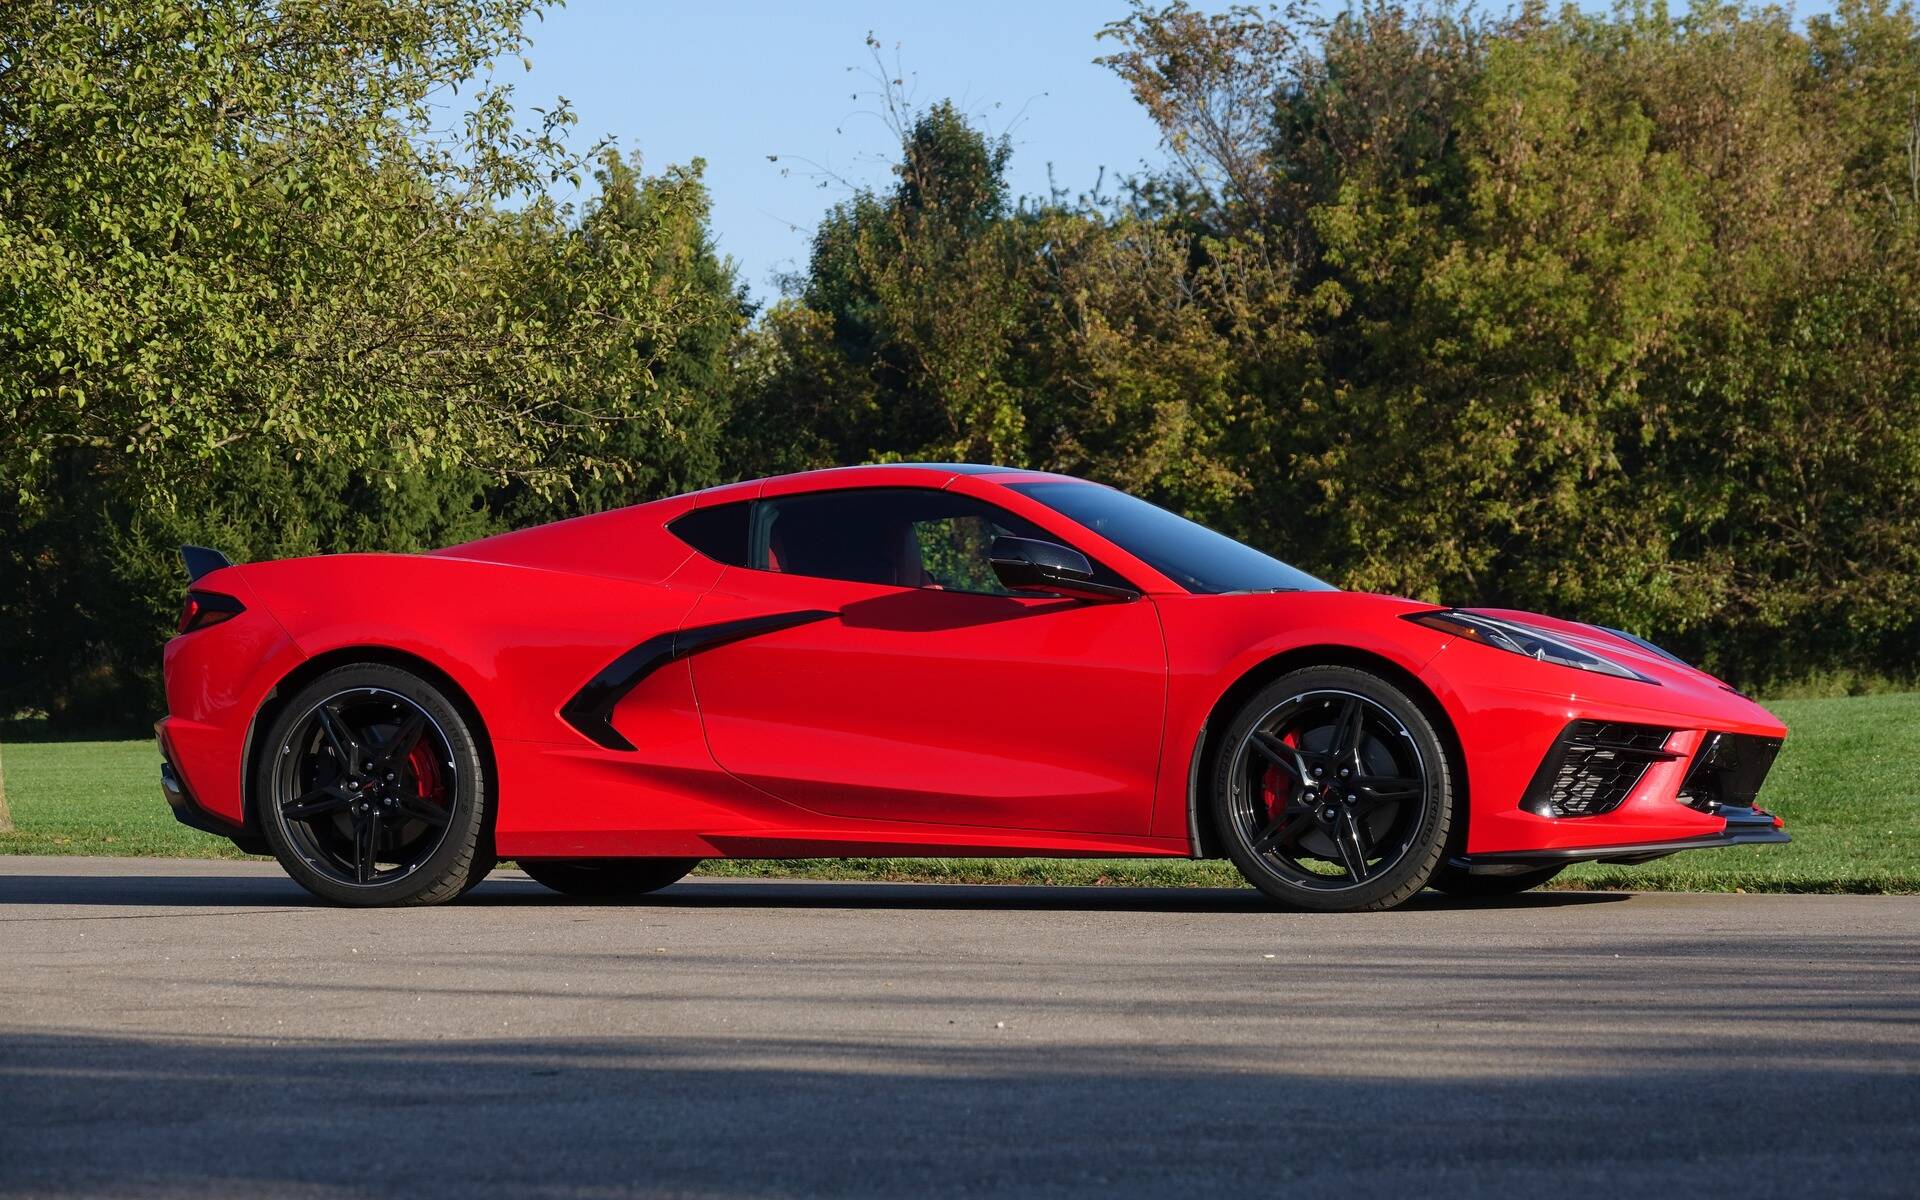 Hear the 2023 Chevrolet Corvette Z06 Before Its Debut This Fall The